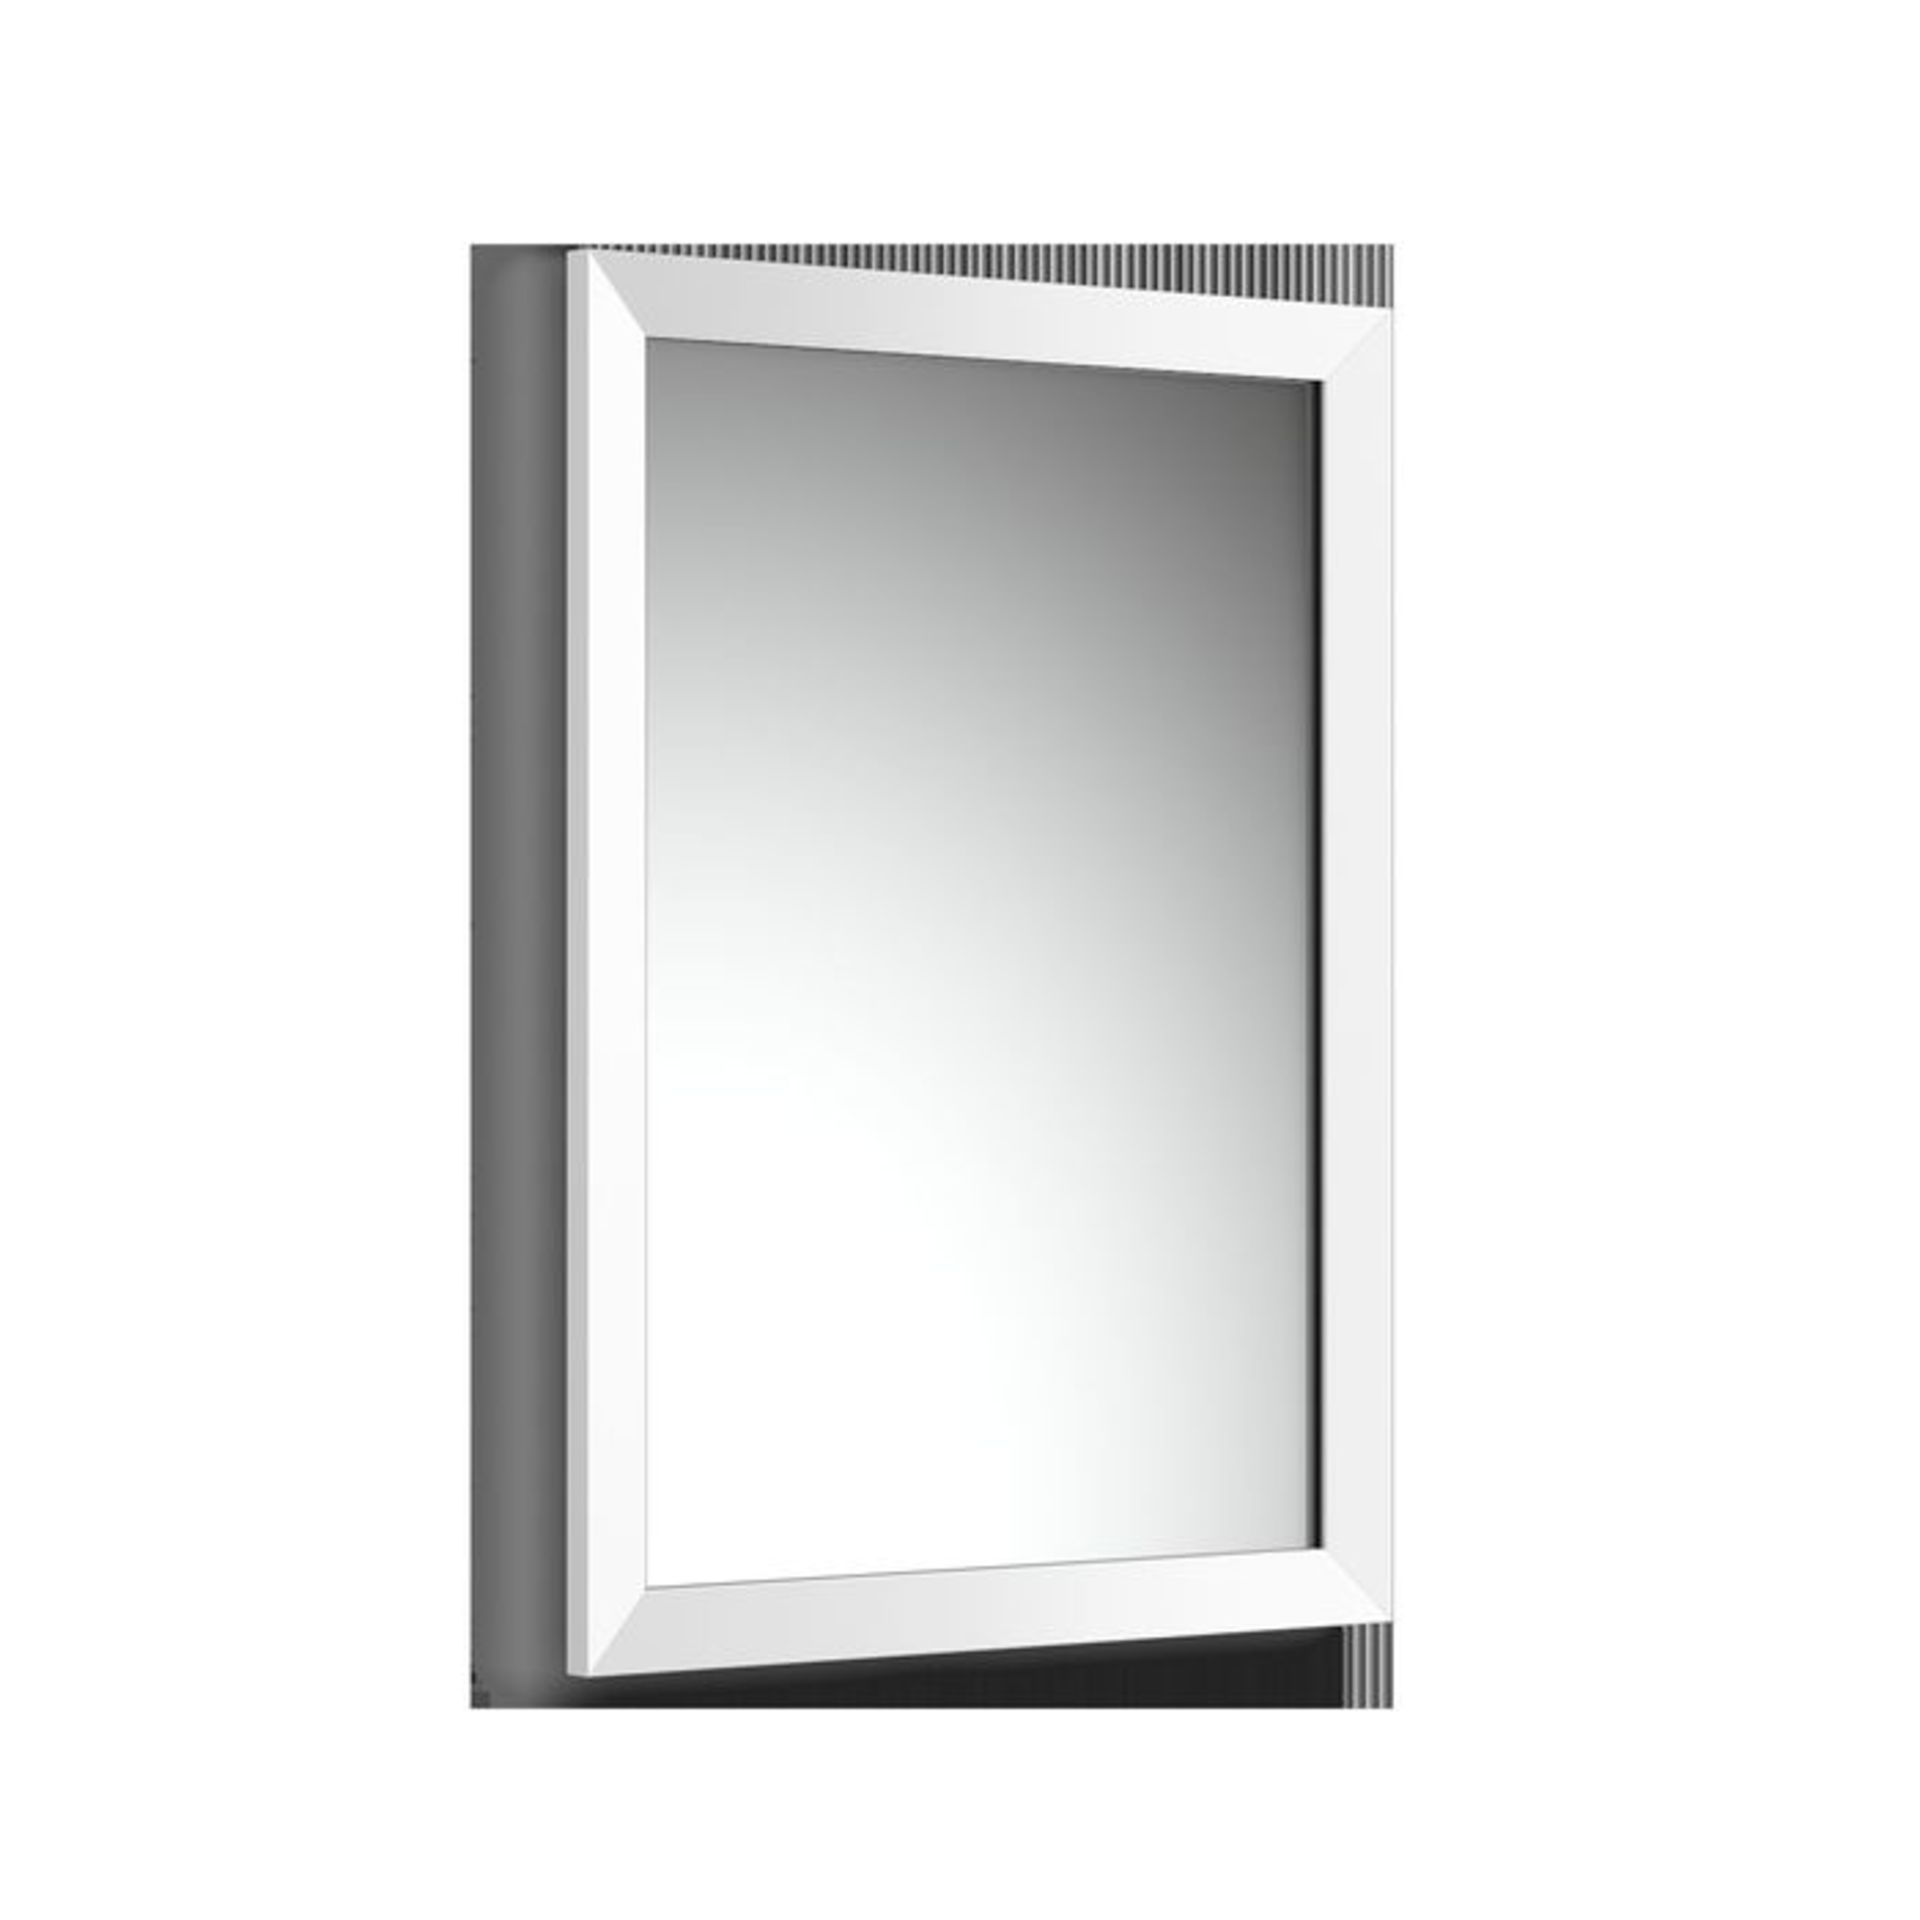 (LP130) 500x700mm Clover Gloss White Framed Mirror Made from eco friendly recycled plastics Water - Image 3 of 3